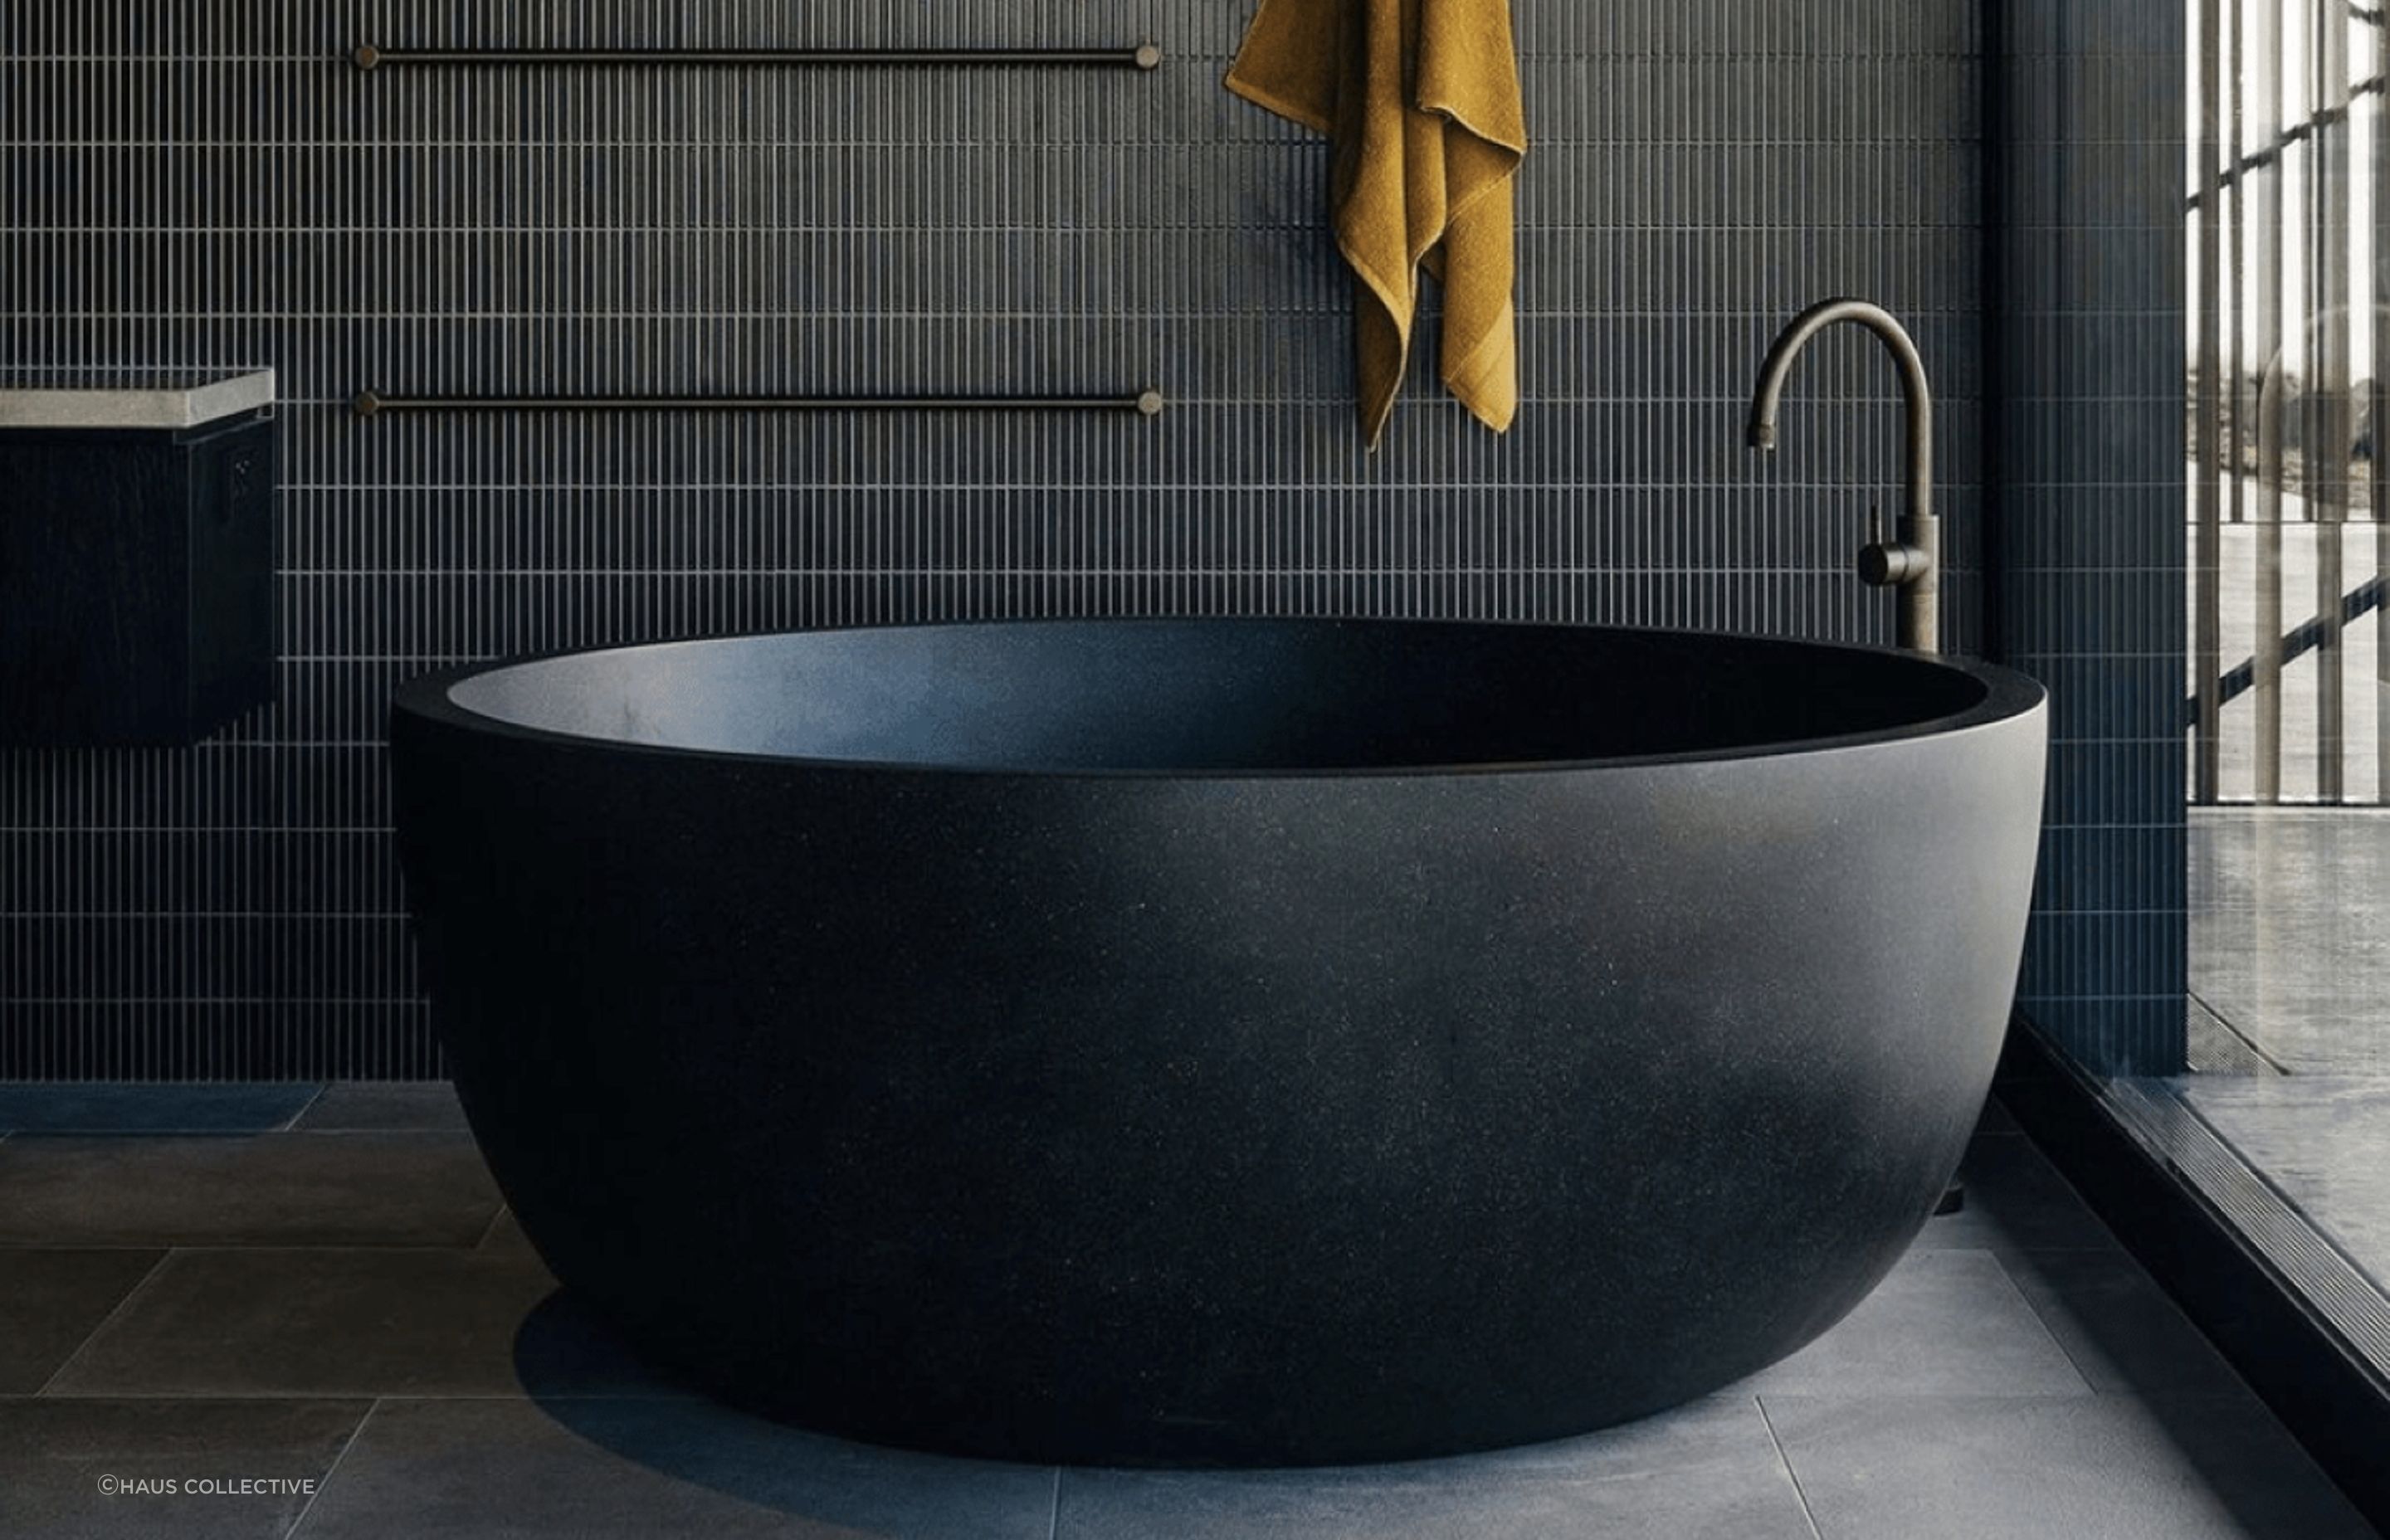 Its handcrafted, timeless form makes the Romeo freestanding bath an exquisite choice for the modern home.